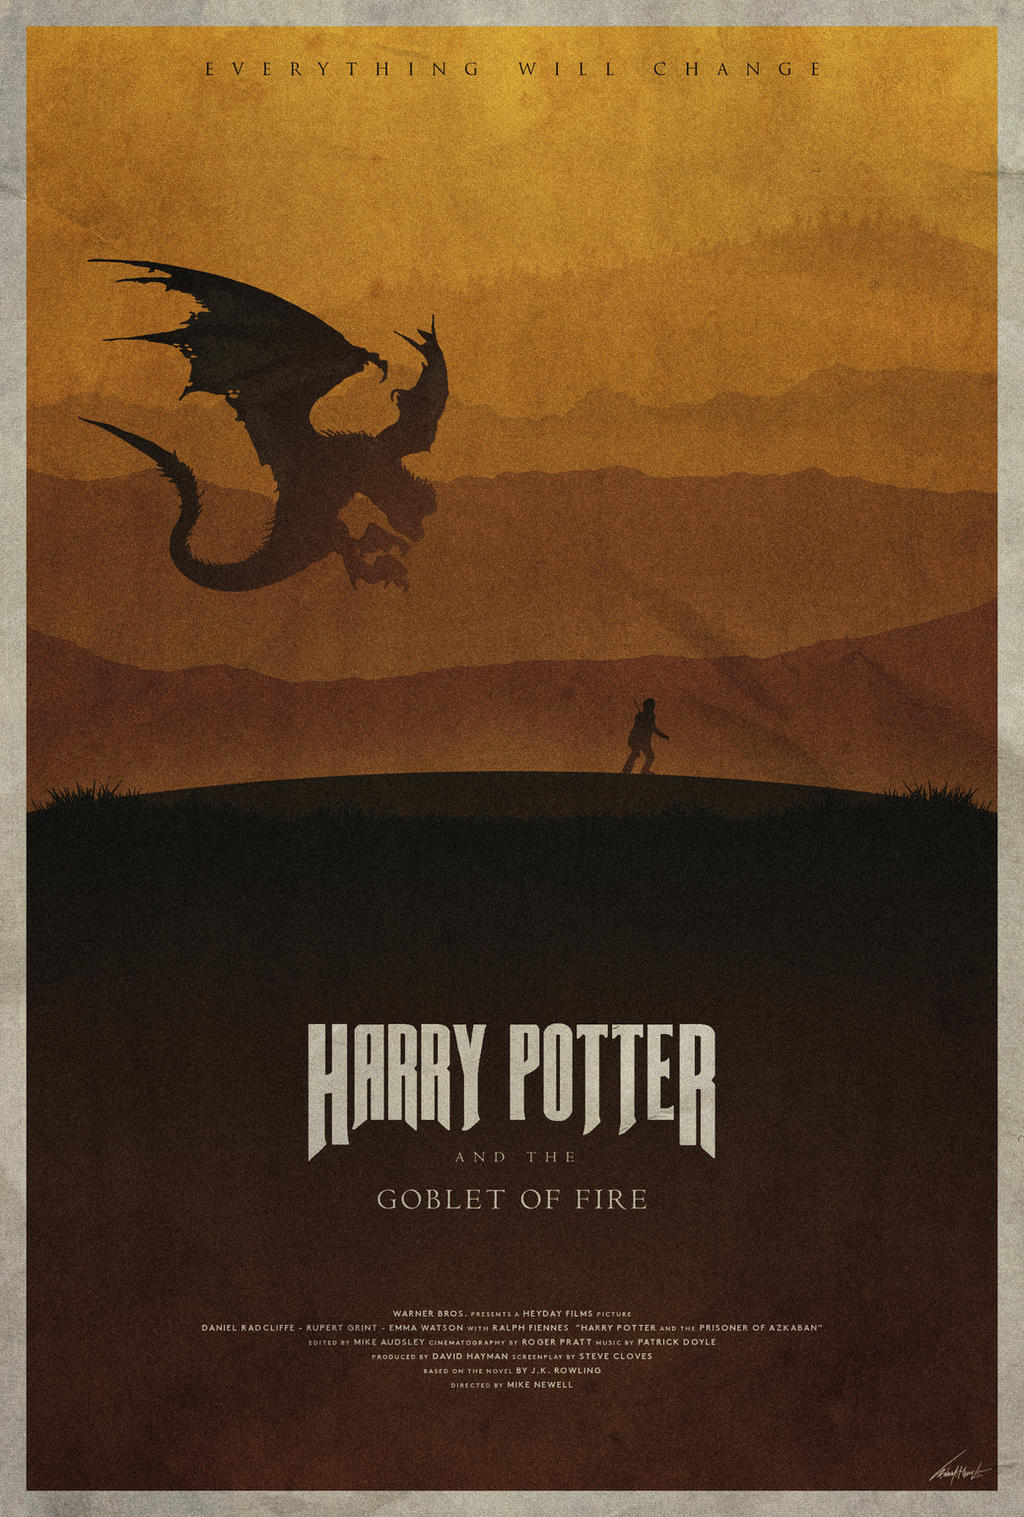 Harry potter and the goblet of fire pdf google drive